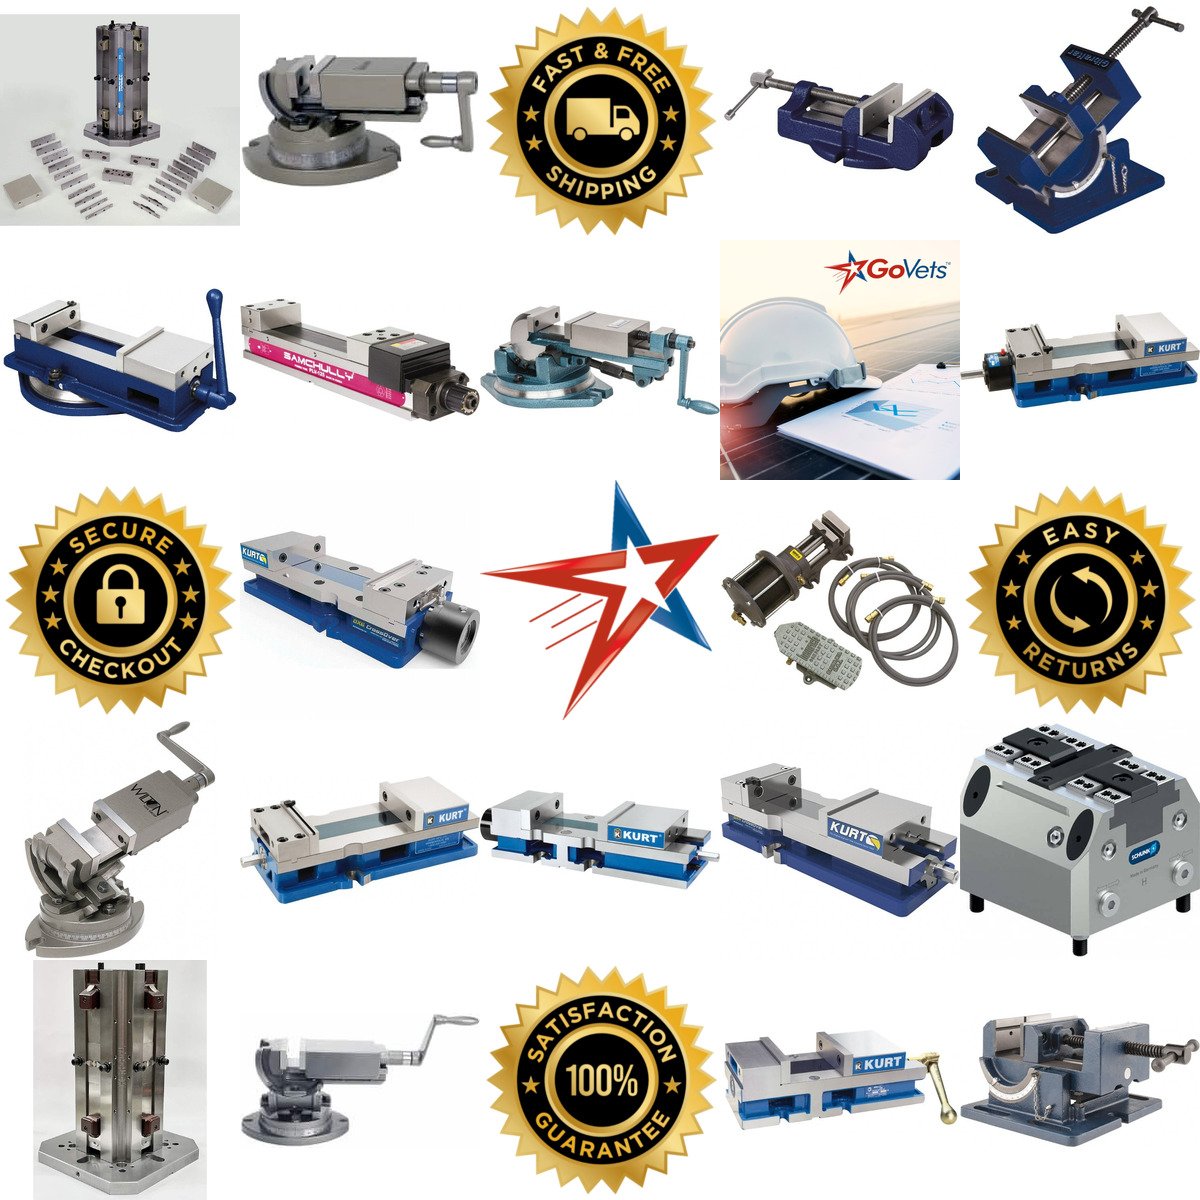 A selection of Machine Vises products on GoVets